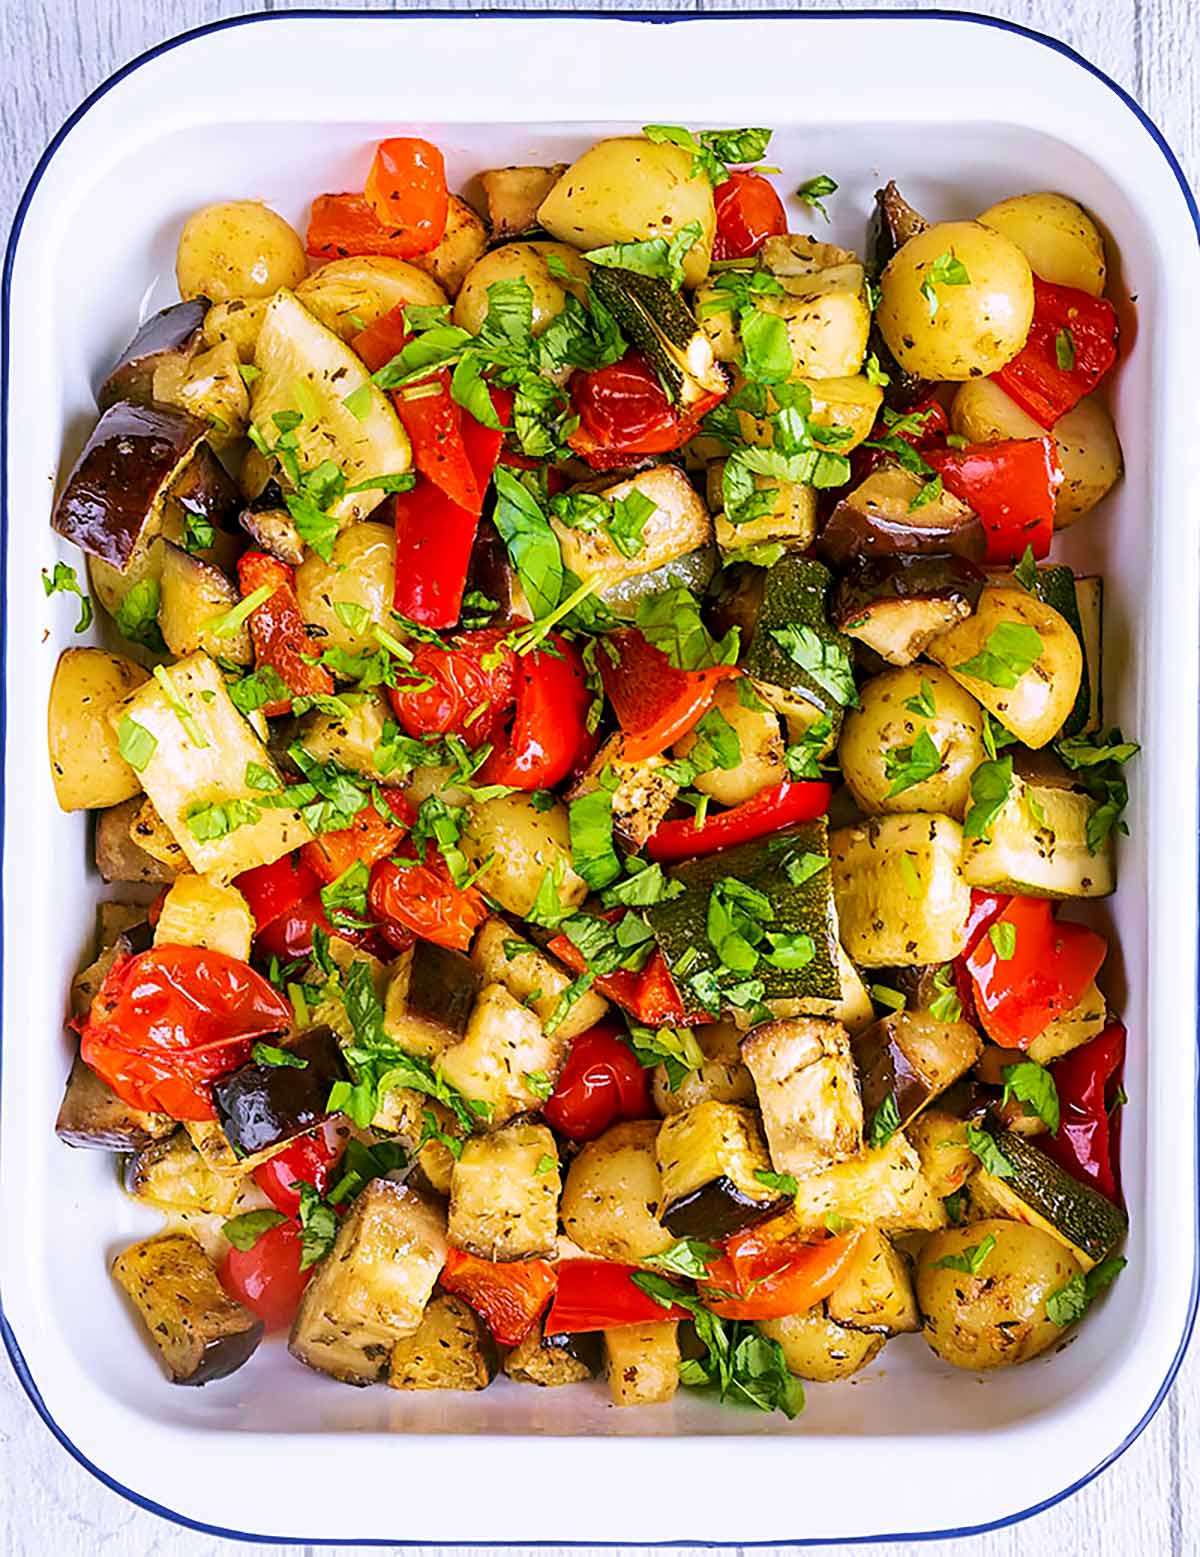 A roasting dish containing roasted vegetables.